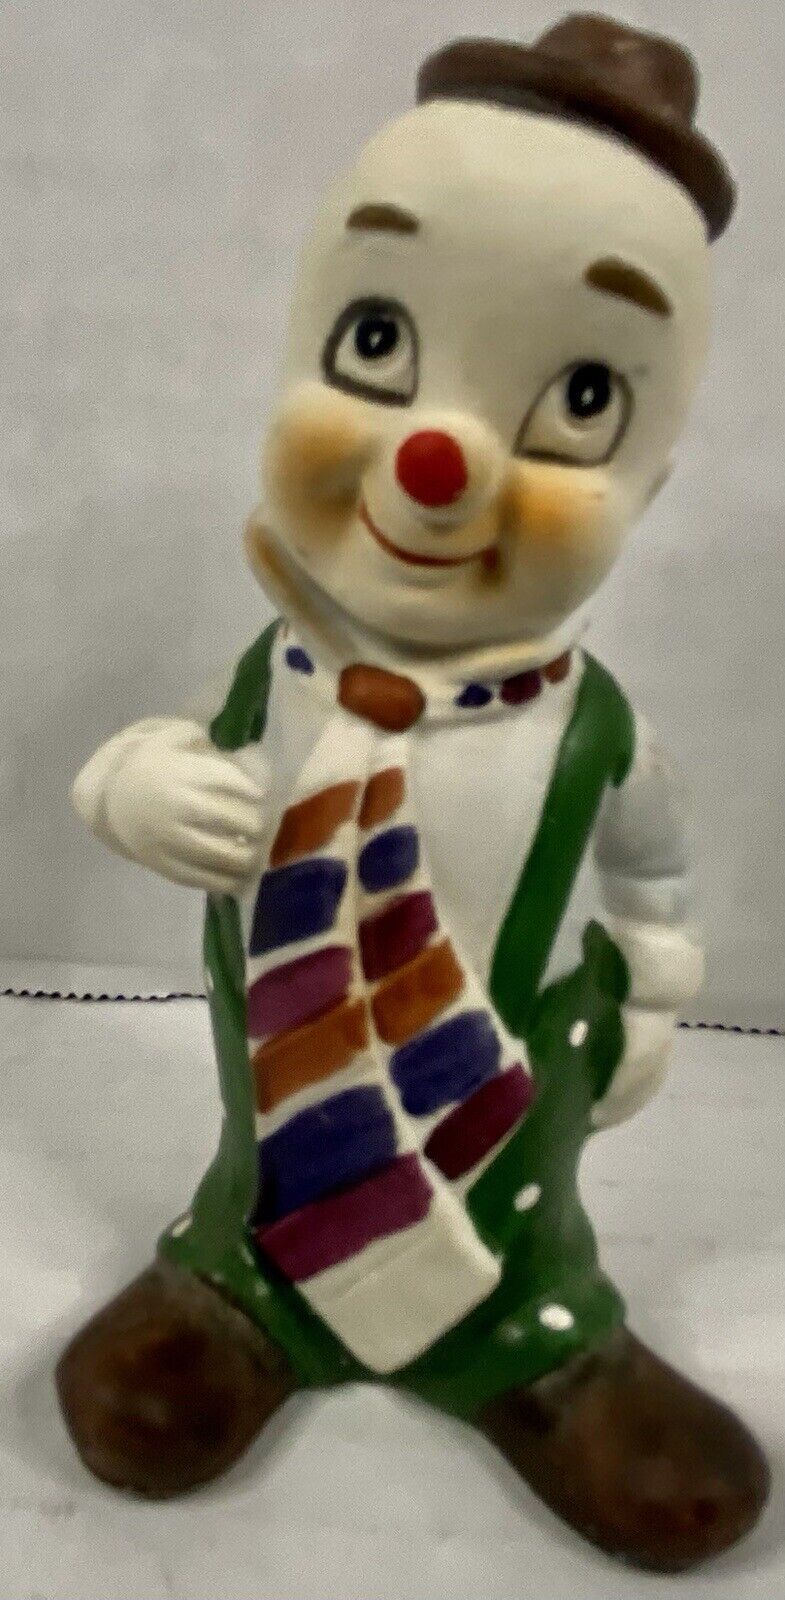 Vintage Whimsical Porcelain Clown 4 inches Tall